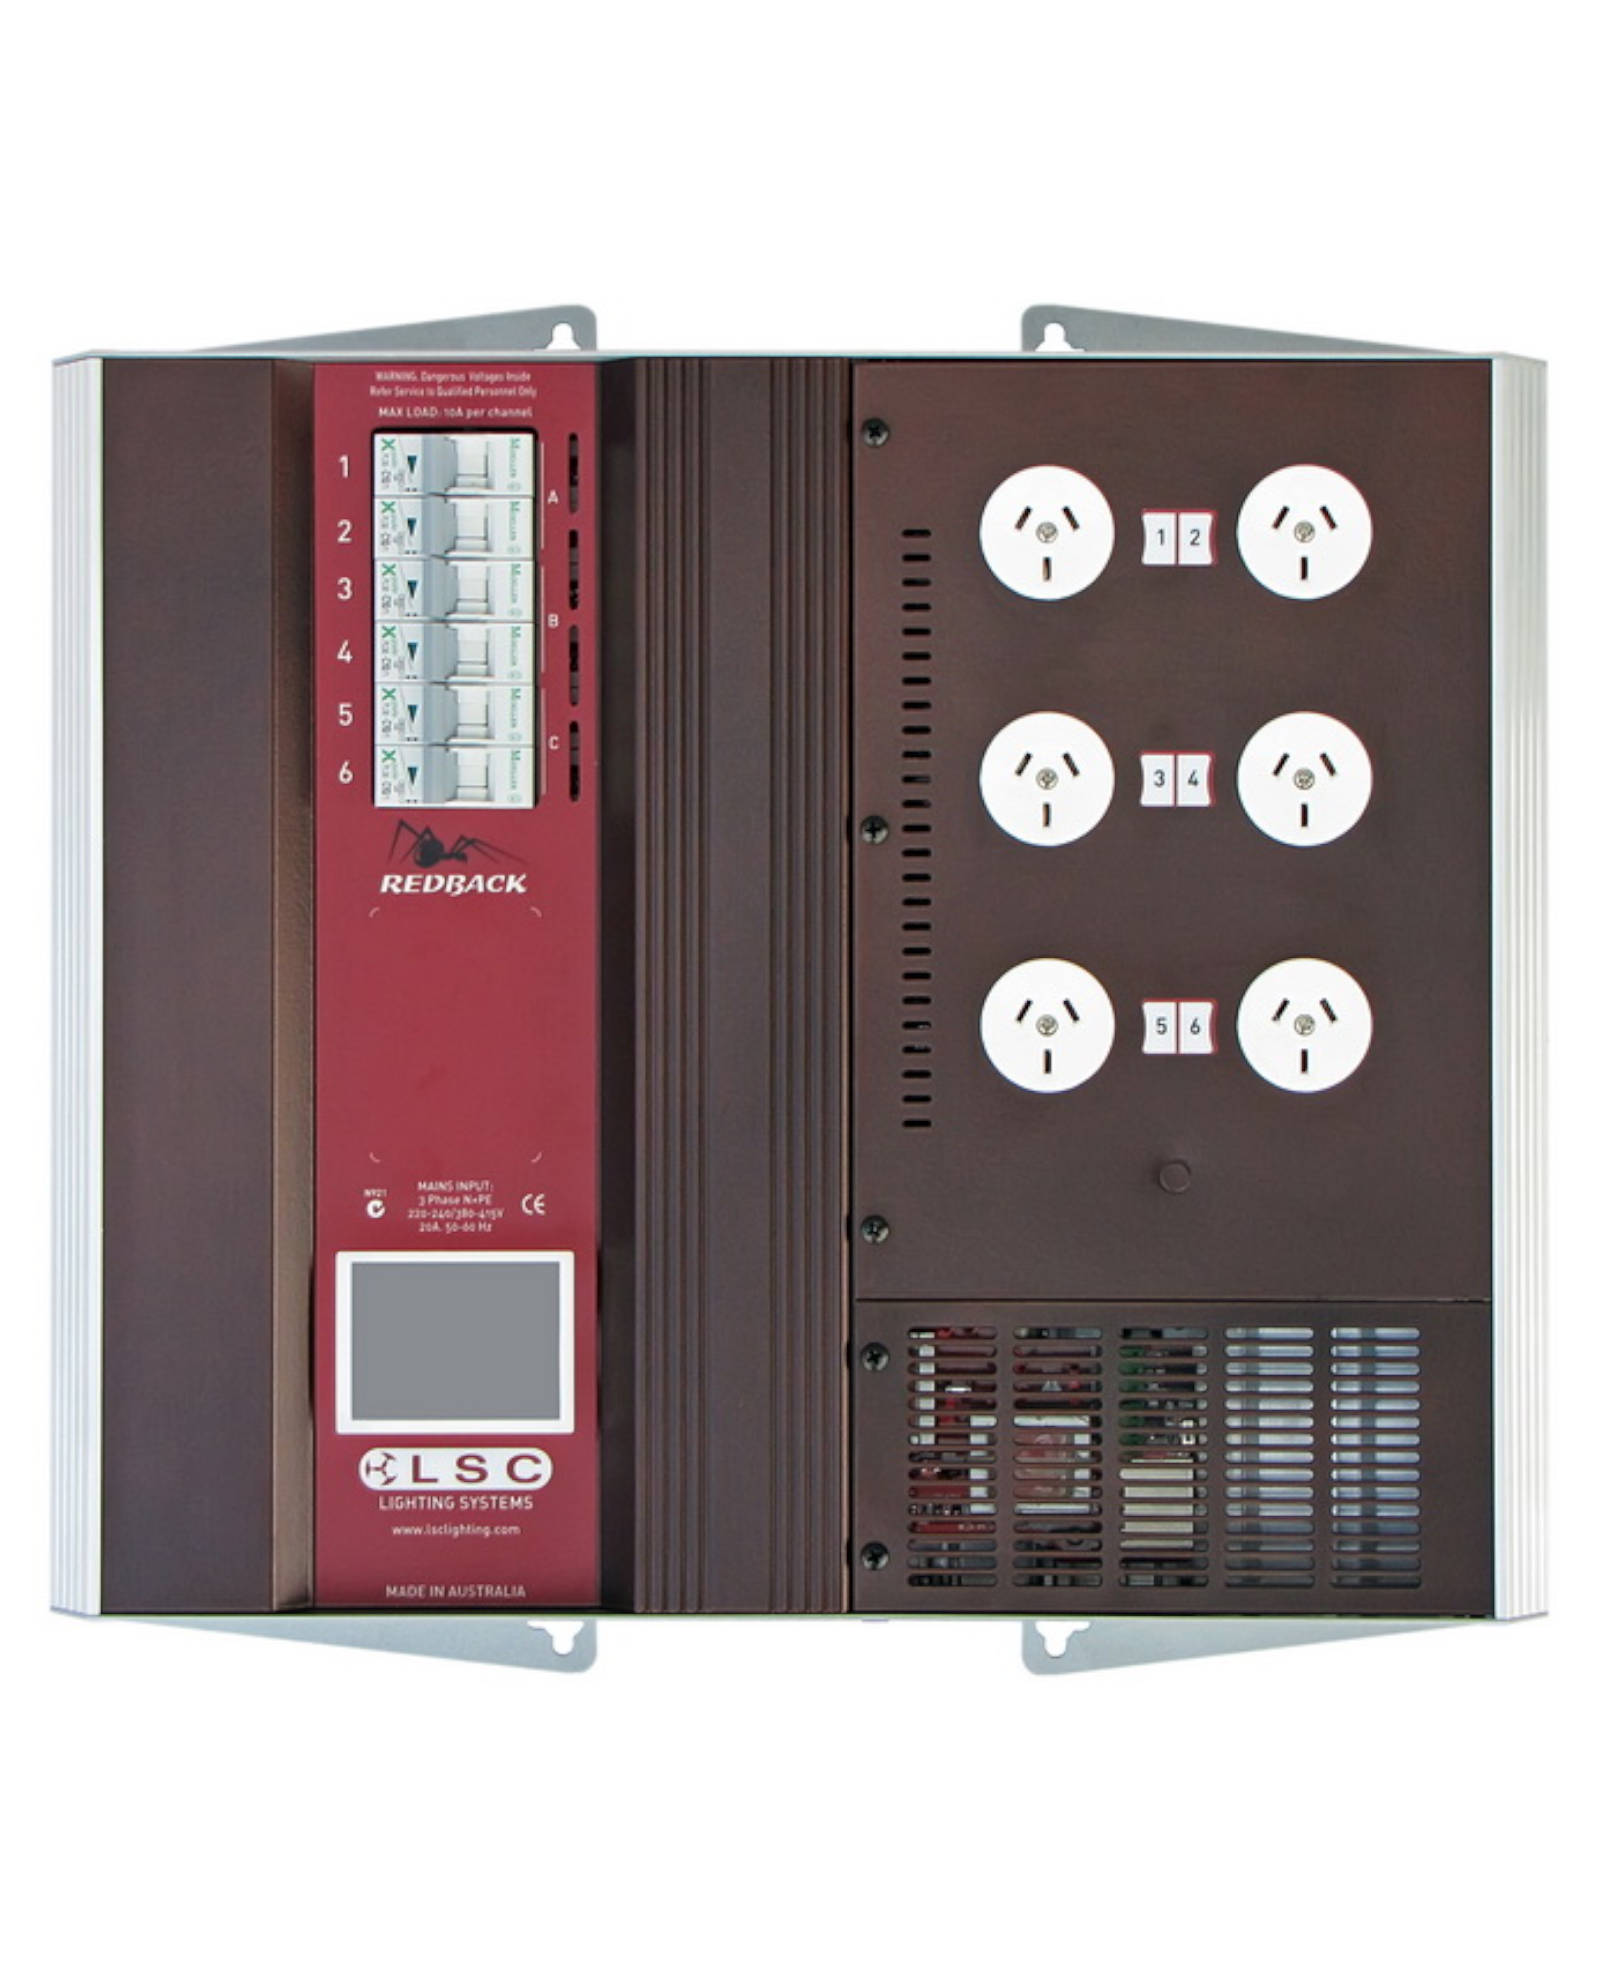 Redback Wallmount 6 Channel X 10a Dimmer With Australian Outlets Without Rcd